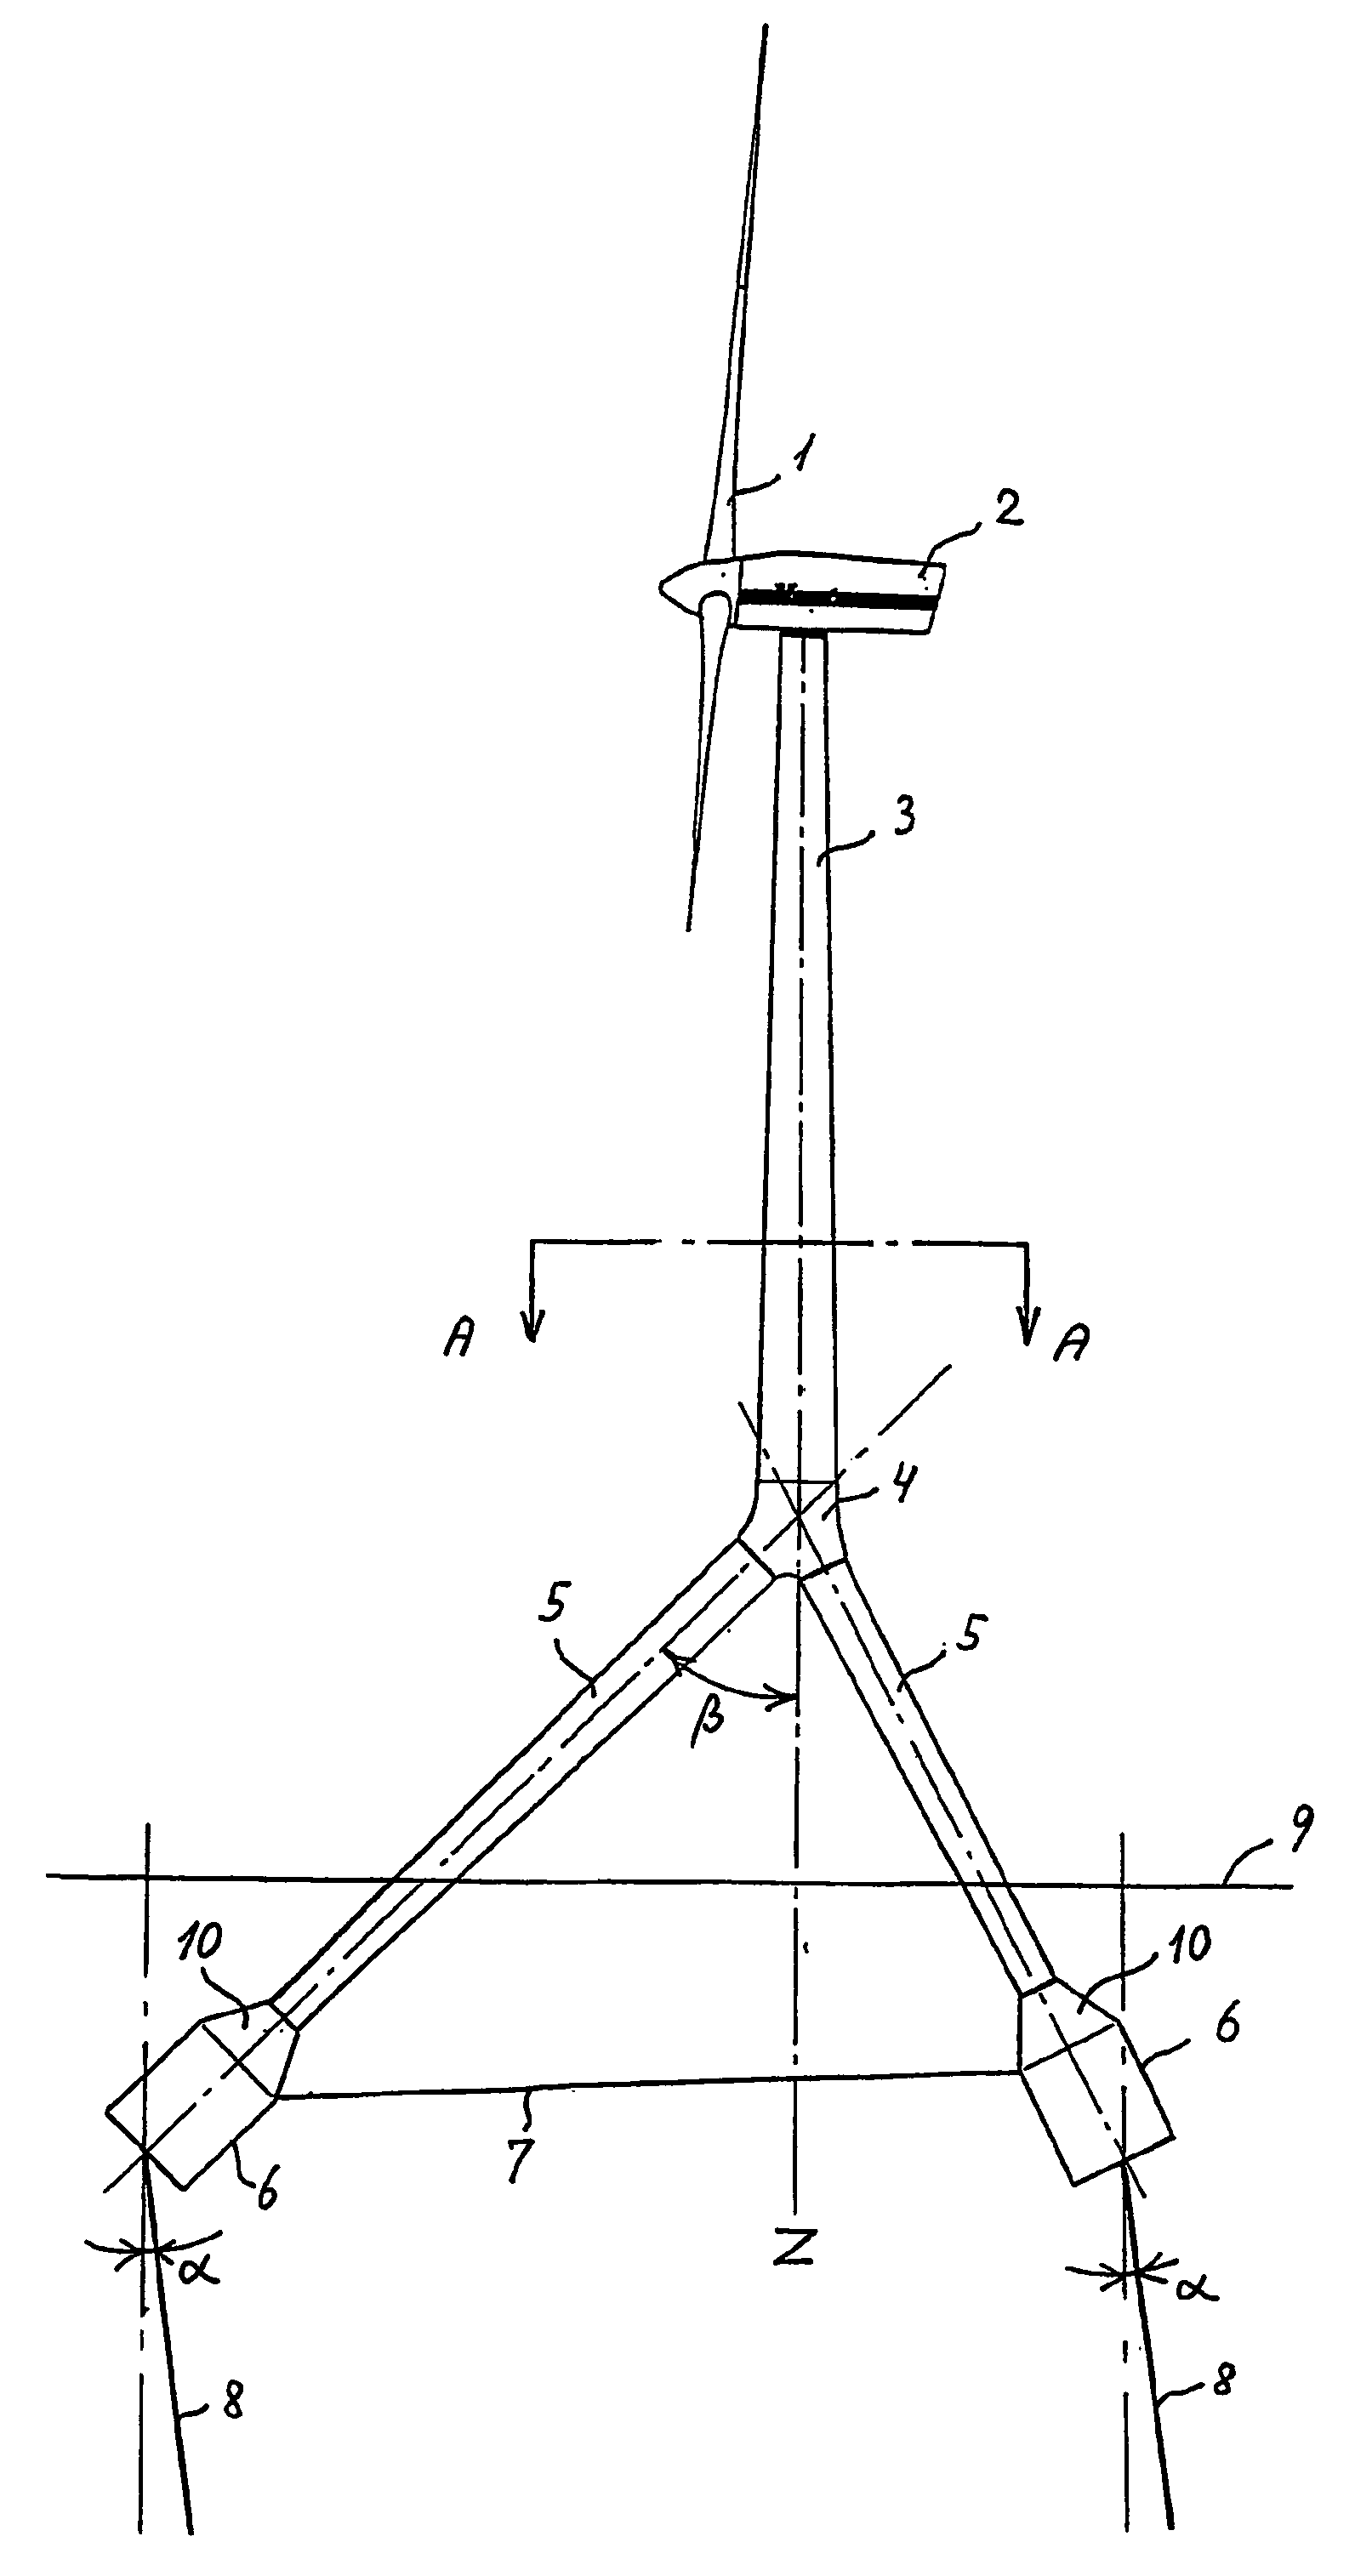 Wind turbine with floating foundation